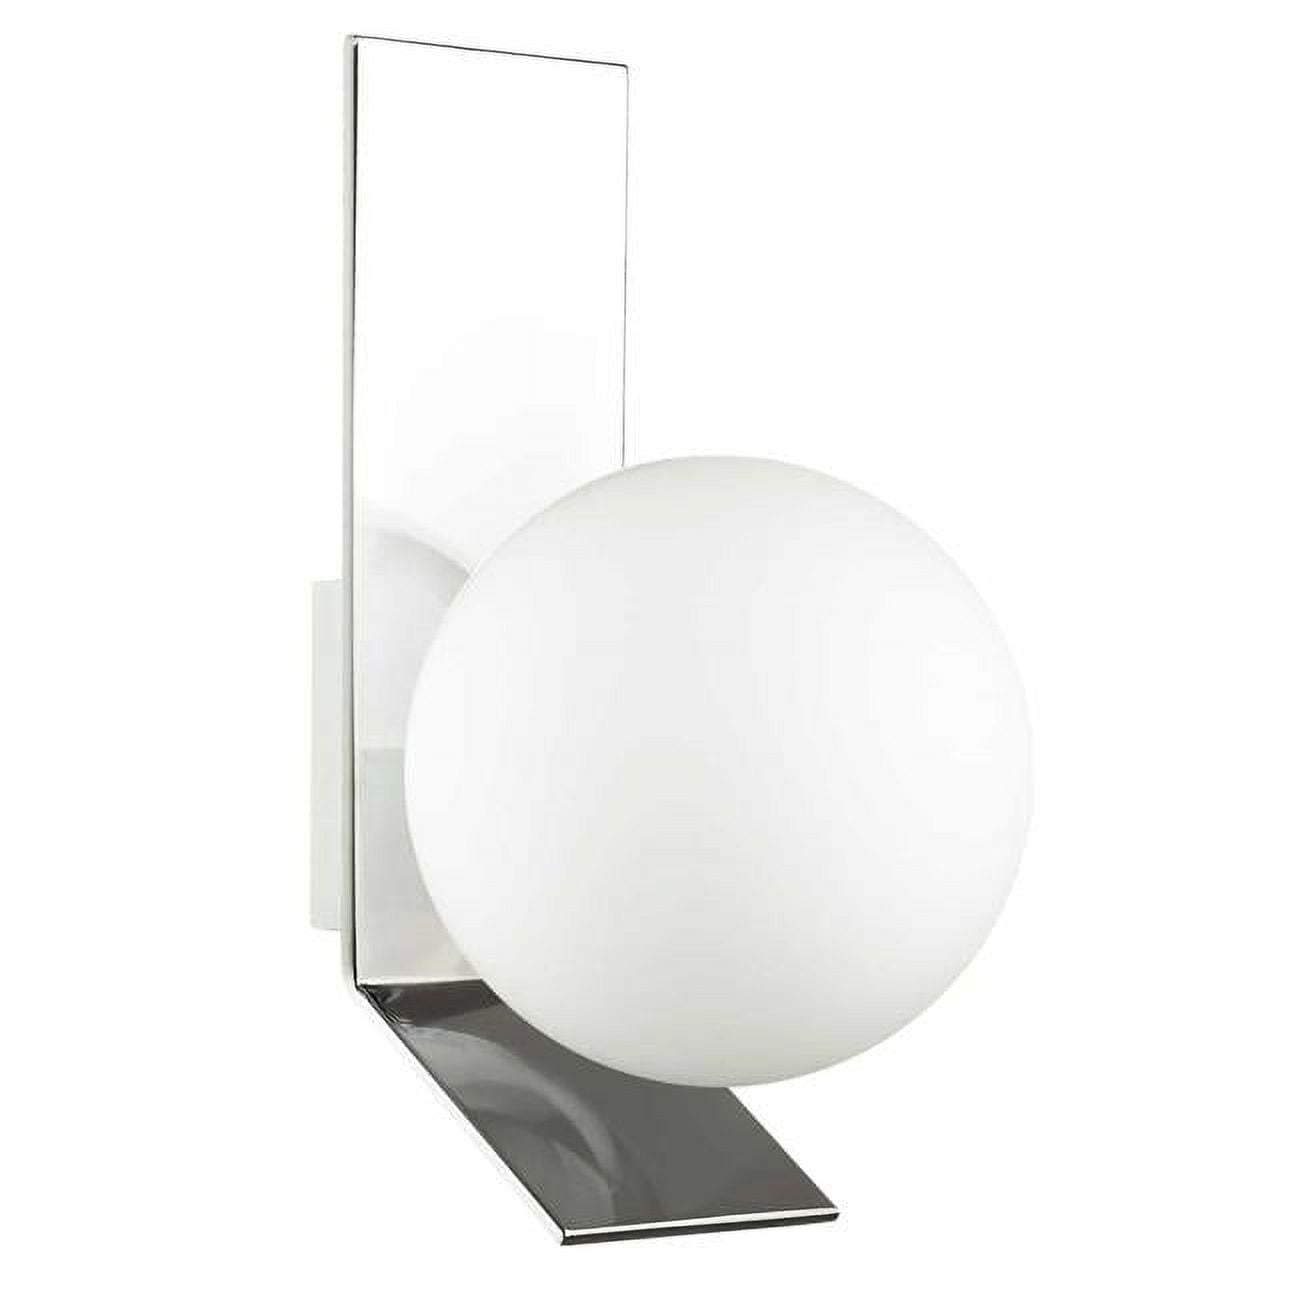 Picture of Dainolite VMT-81W-PC 1 Light Halogen Wall Sconce, Polished Chrome with Opal White Glass